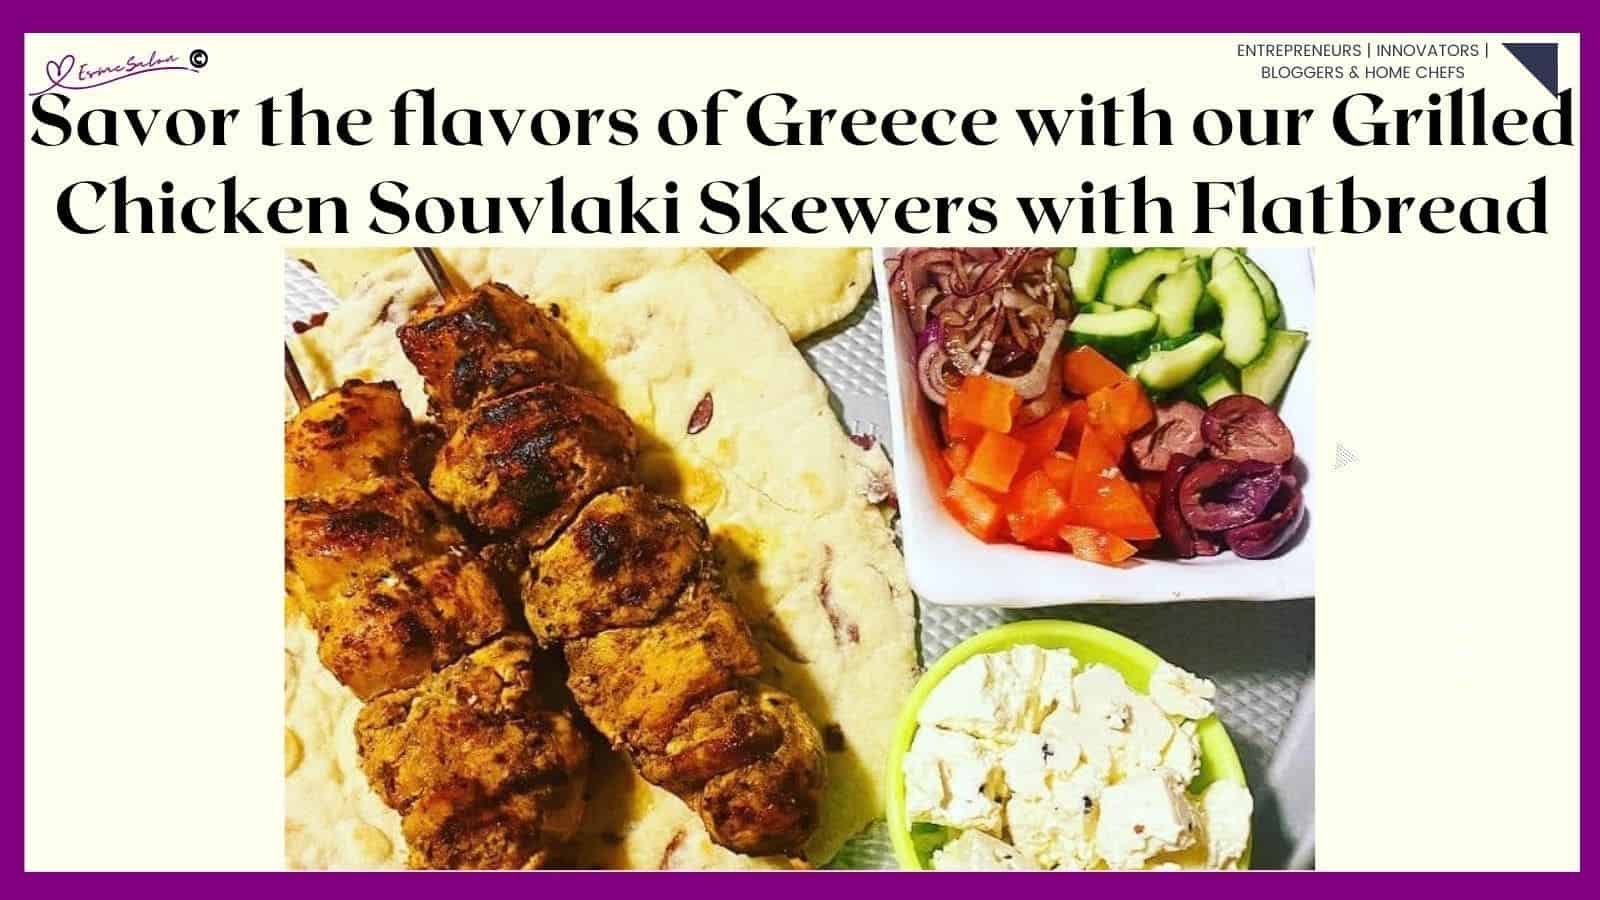 an image of two Grilled Chicken Souvlaki Skewers With Flatbread and Greek salad on the side